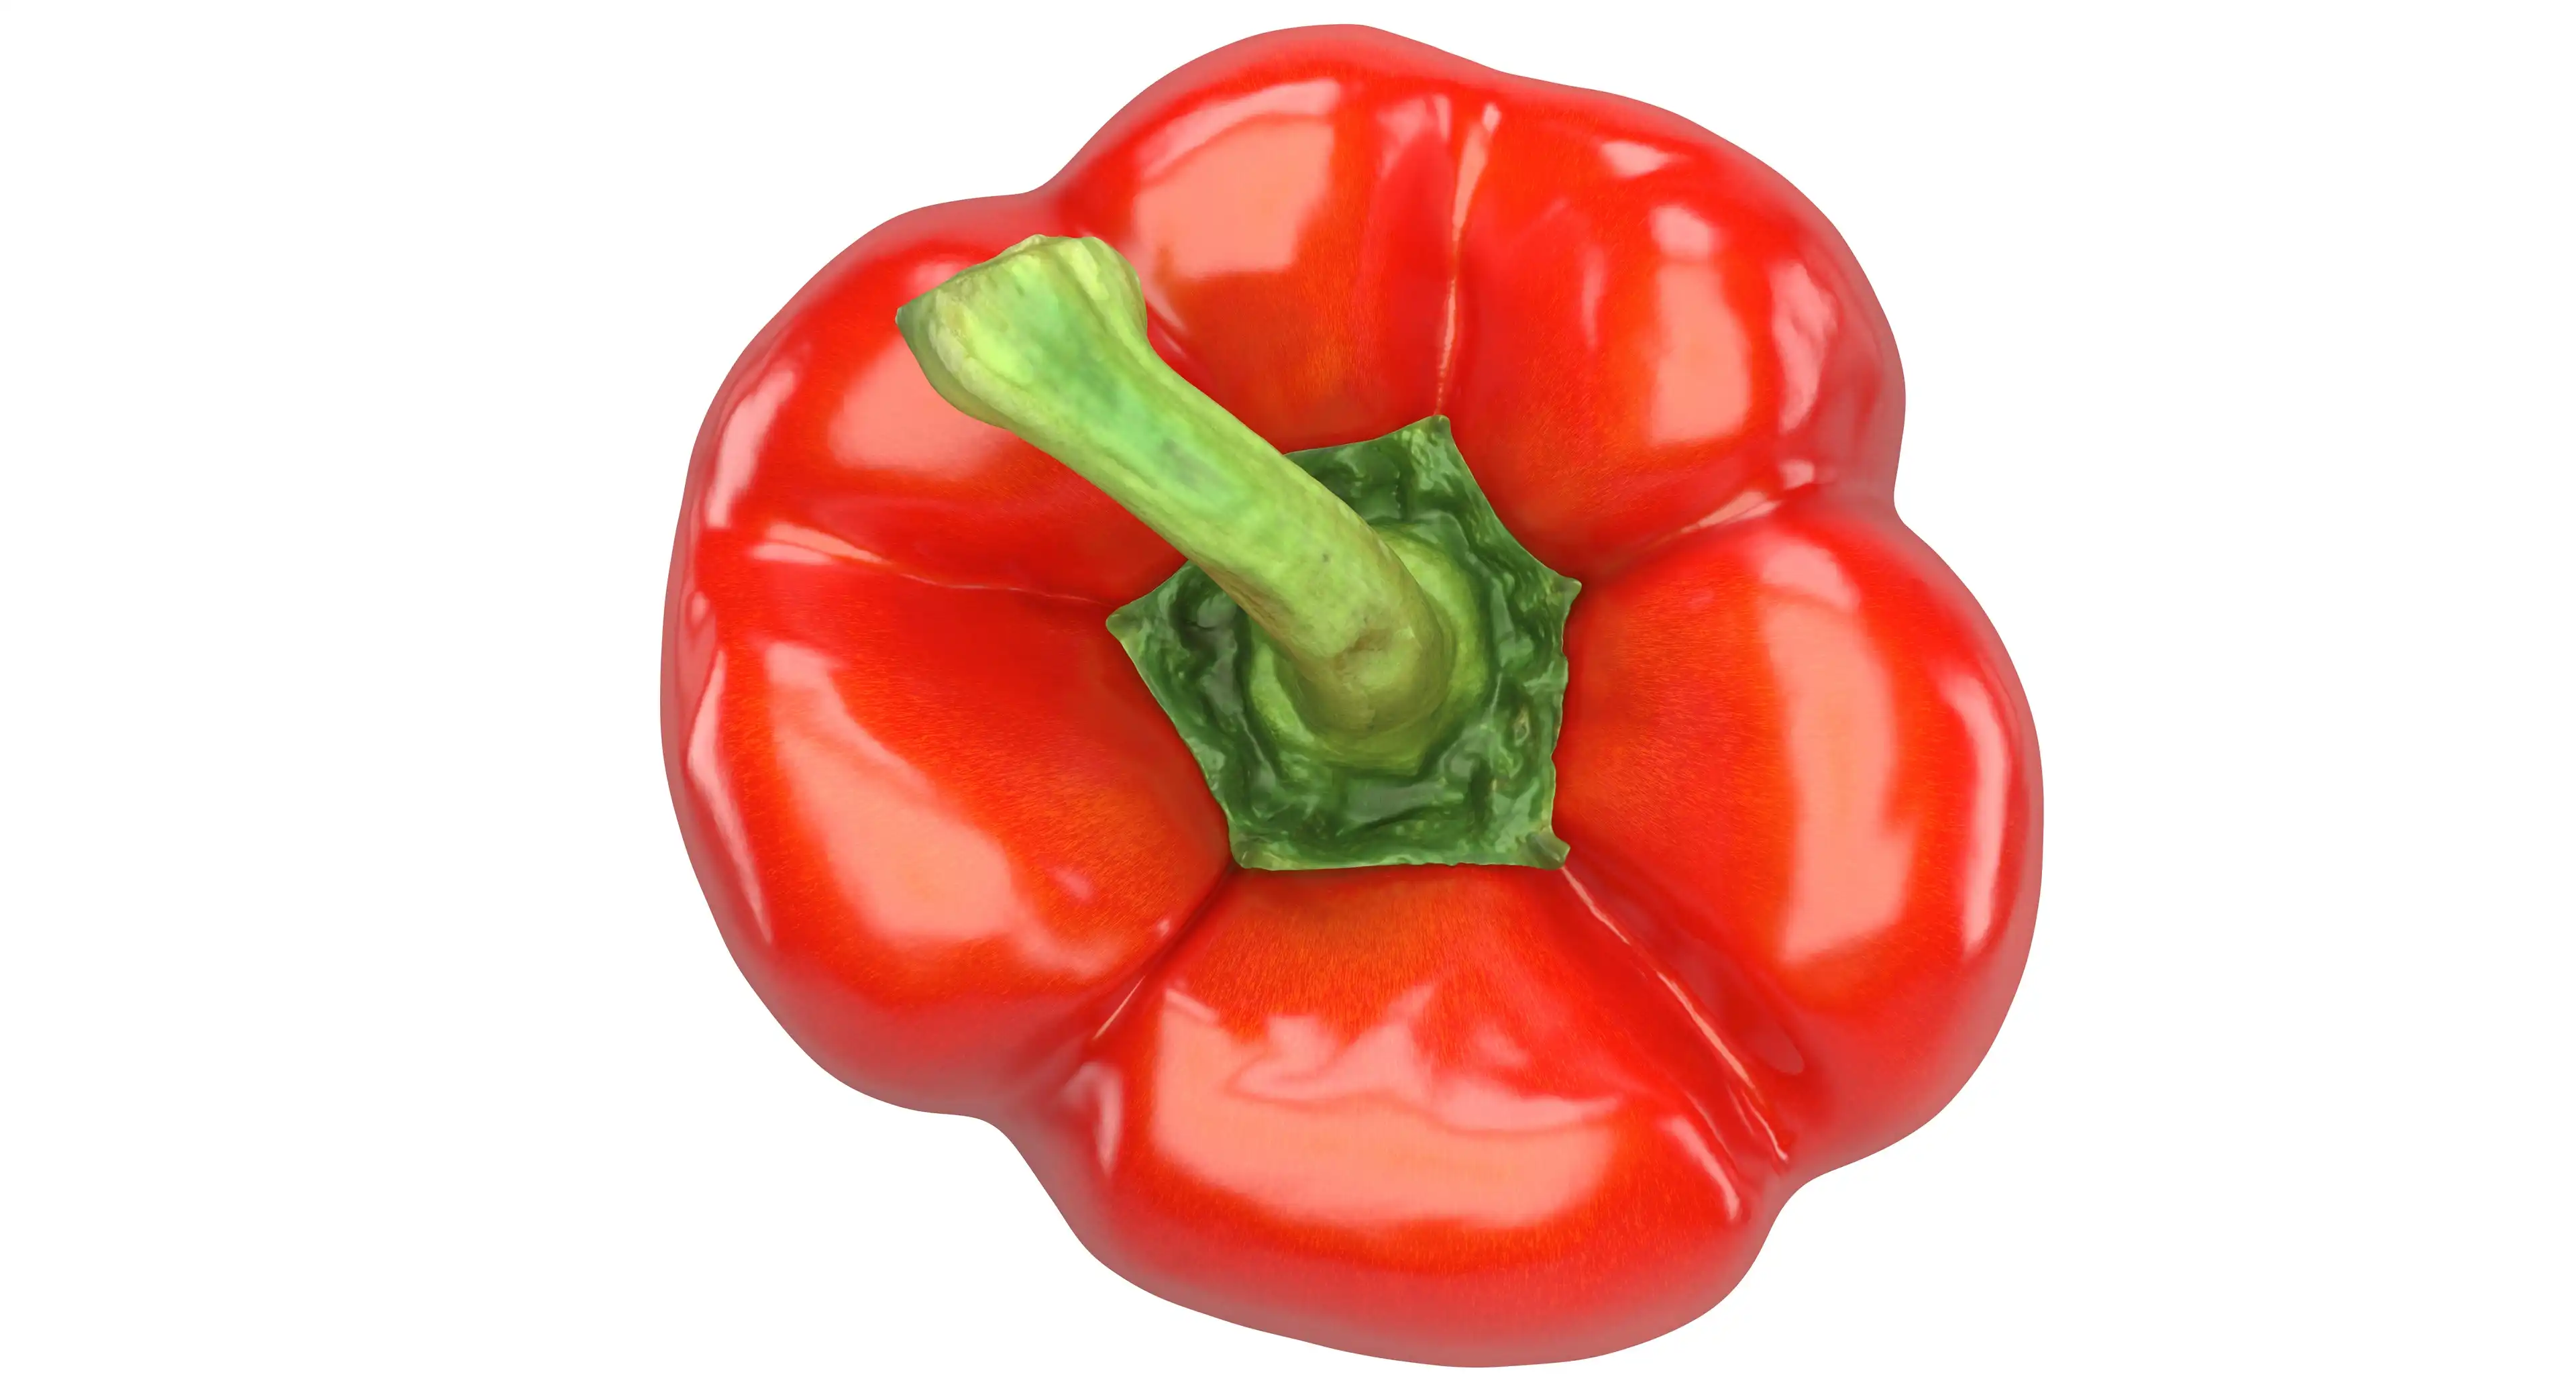 Realistic visualization top view of 3d model of red bell pepper with green trunk.